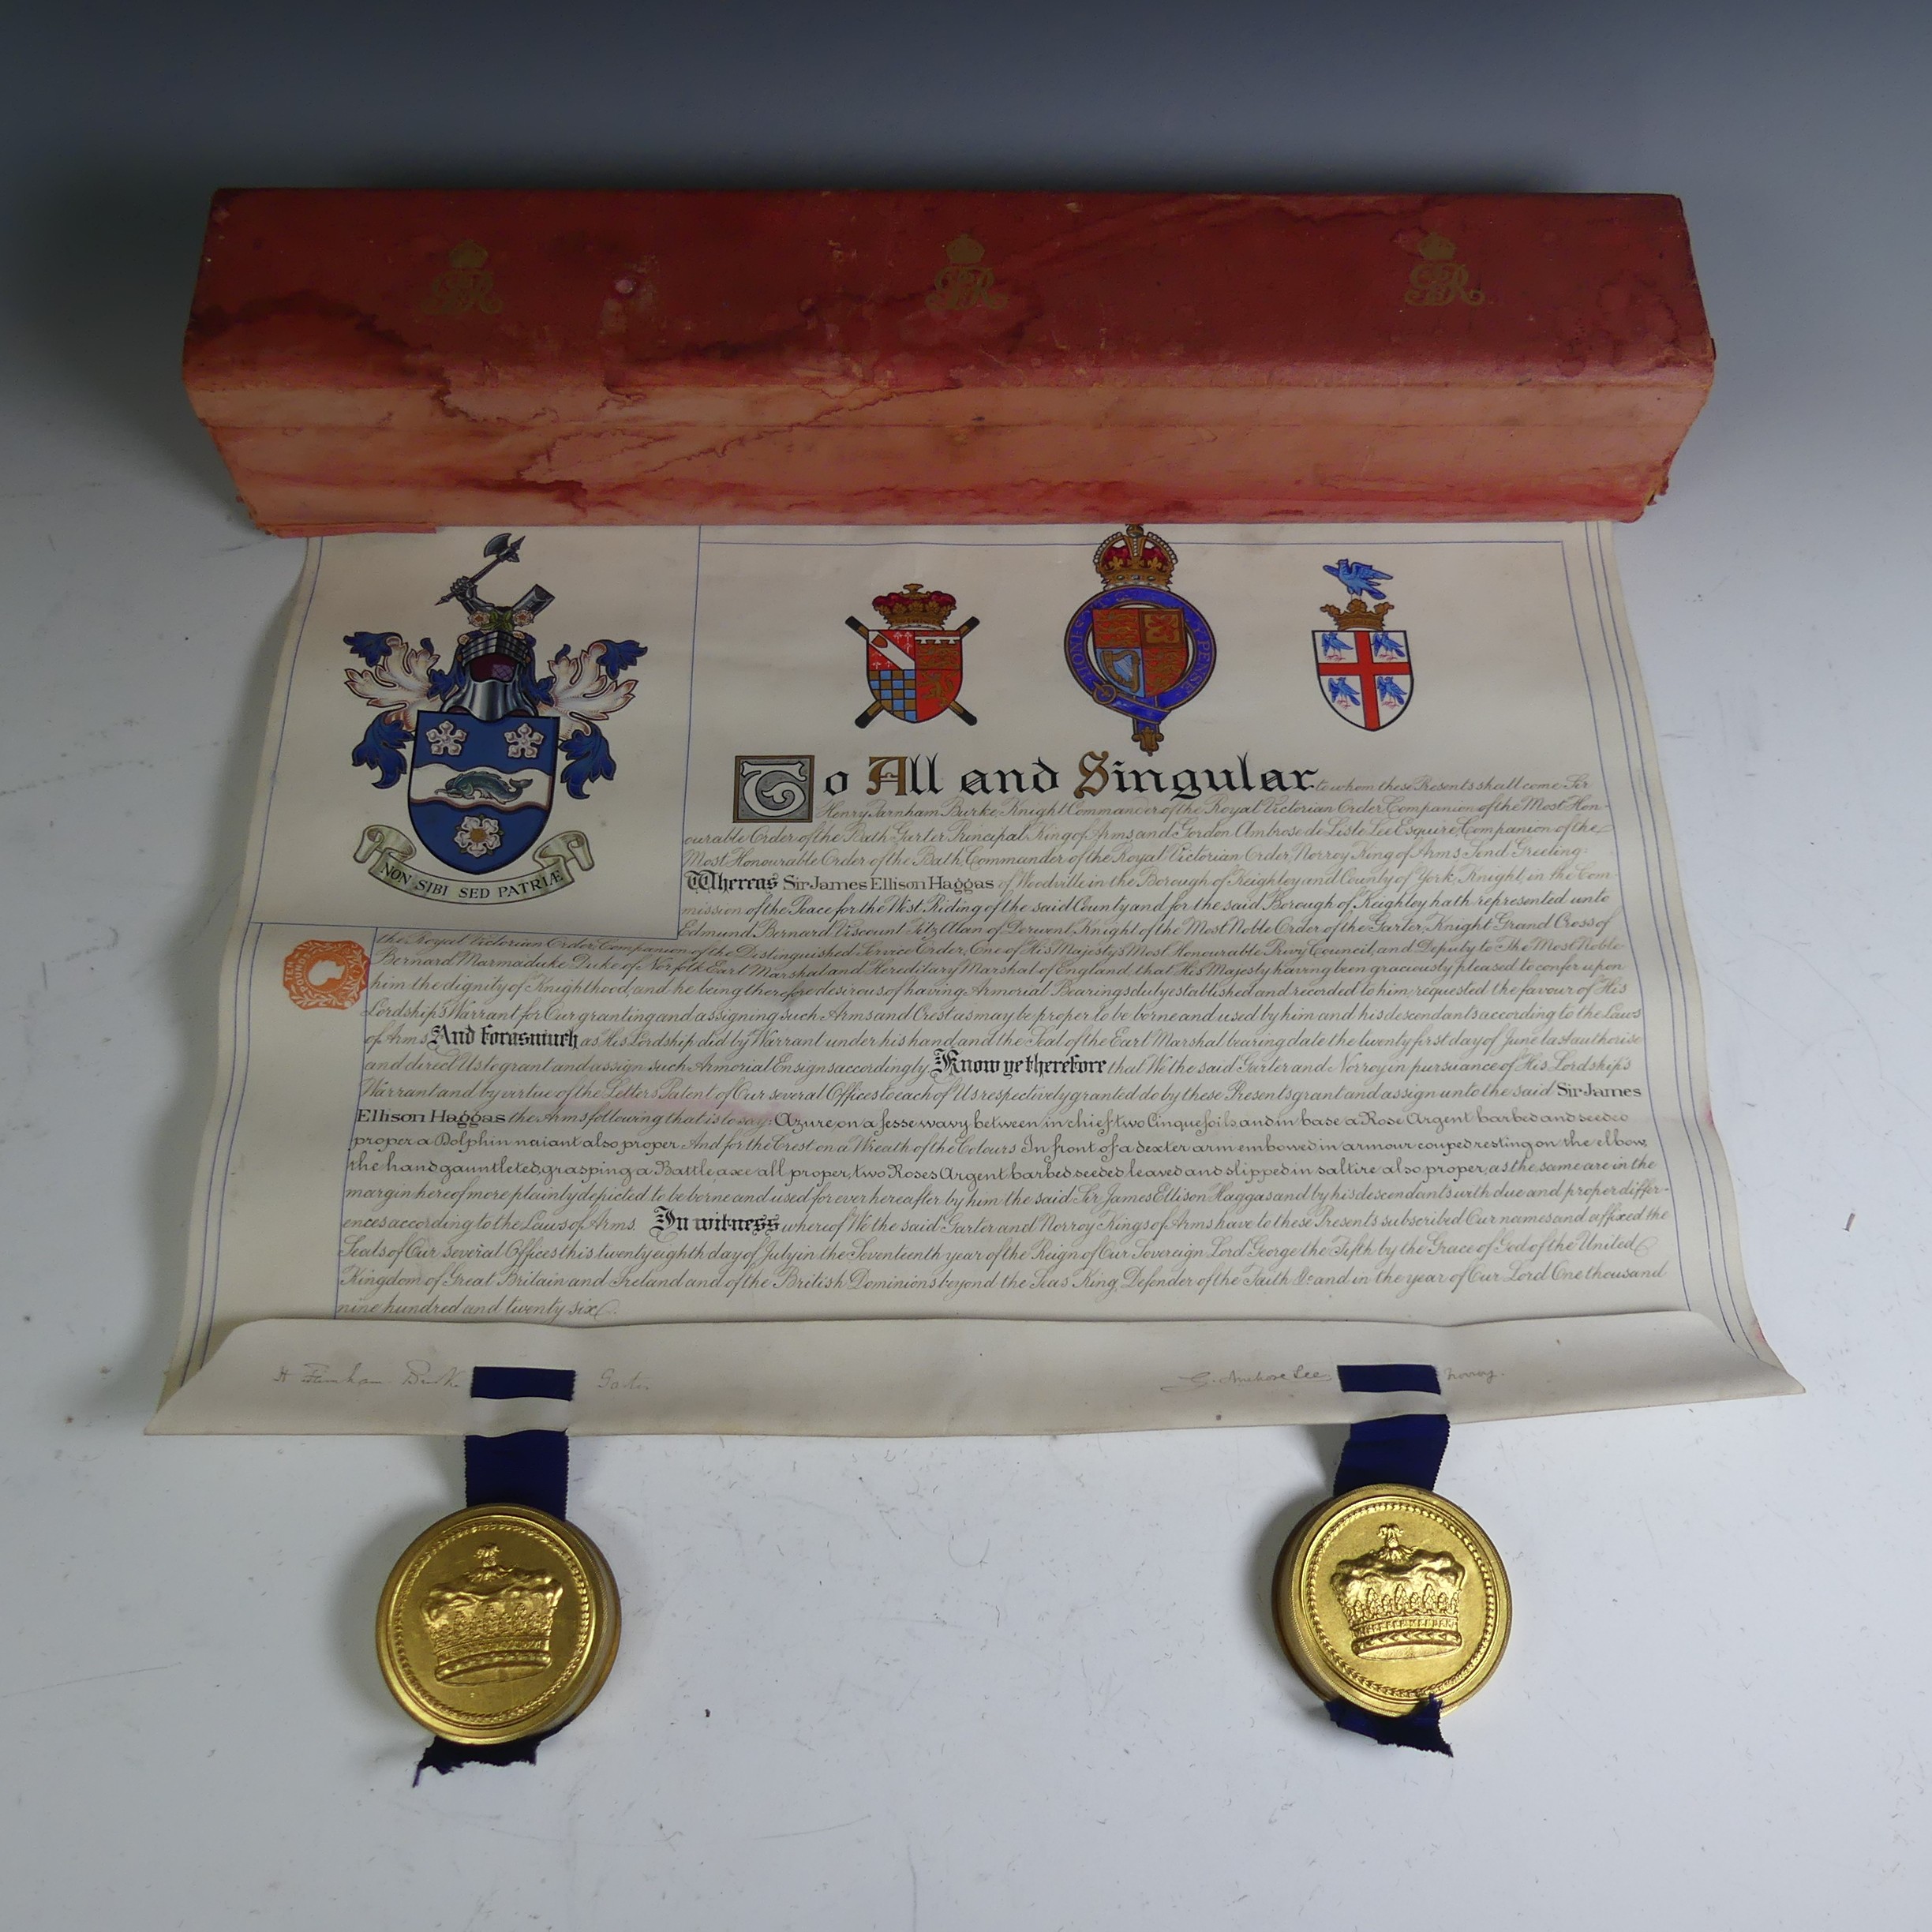 H.M King George V Grant of Arms  illuminated scroll, to Sir James Ellison Haggas (1849-1939), with